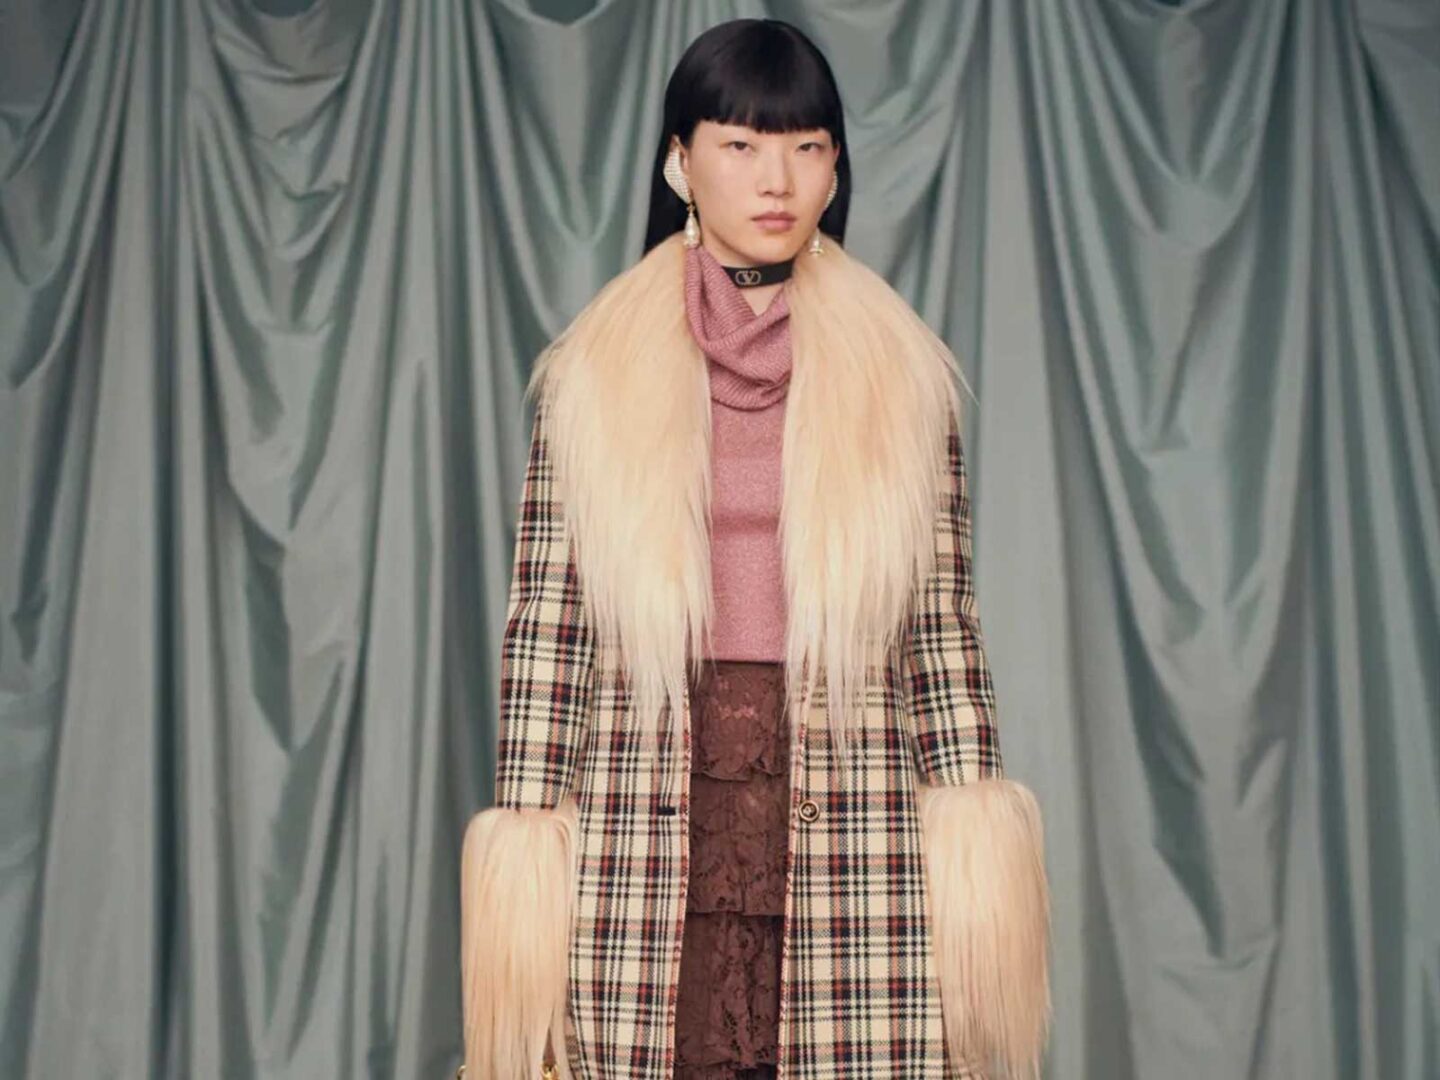 Alessandro Michele makes his debut at Valentino with Resort 2025 collection